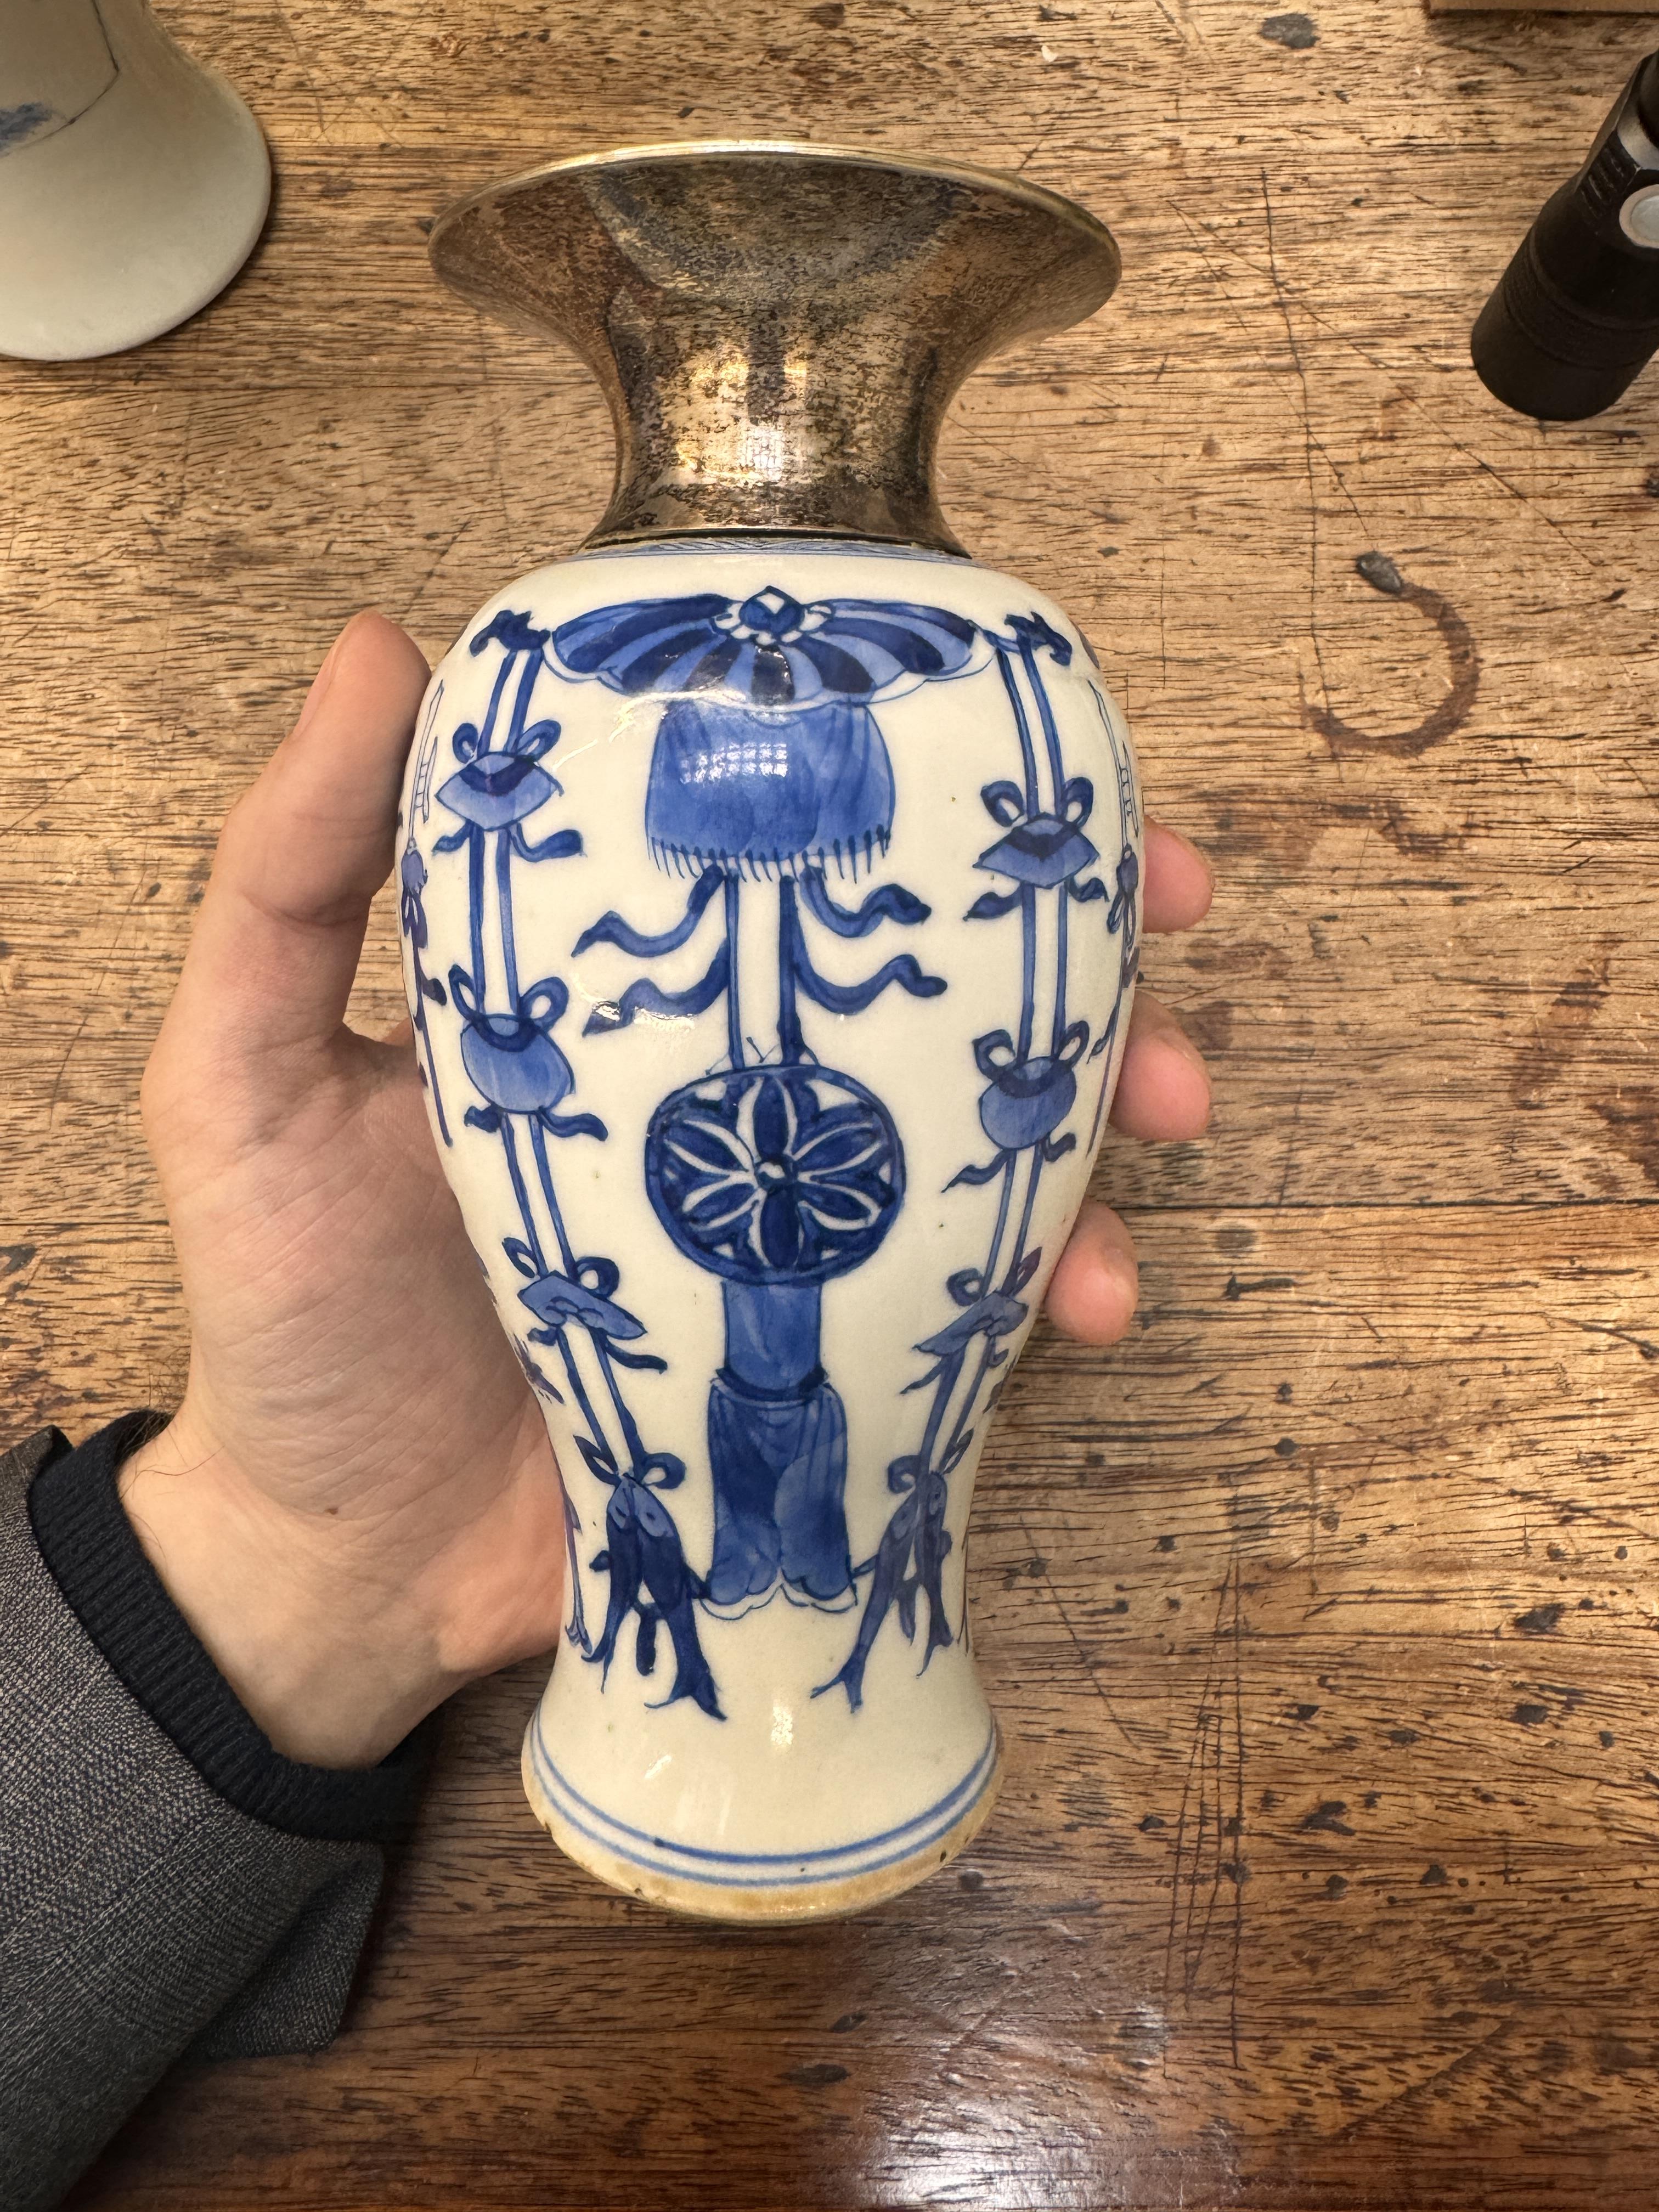 A CHINESE BLUE AND WHITE VASE 清康熙 青花雙魚紋瓶 - Image 12 of 17